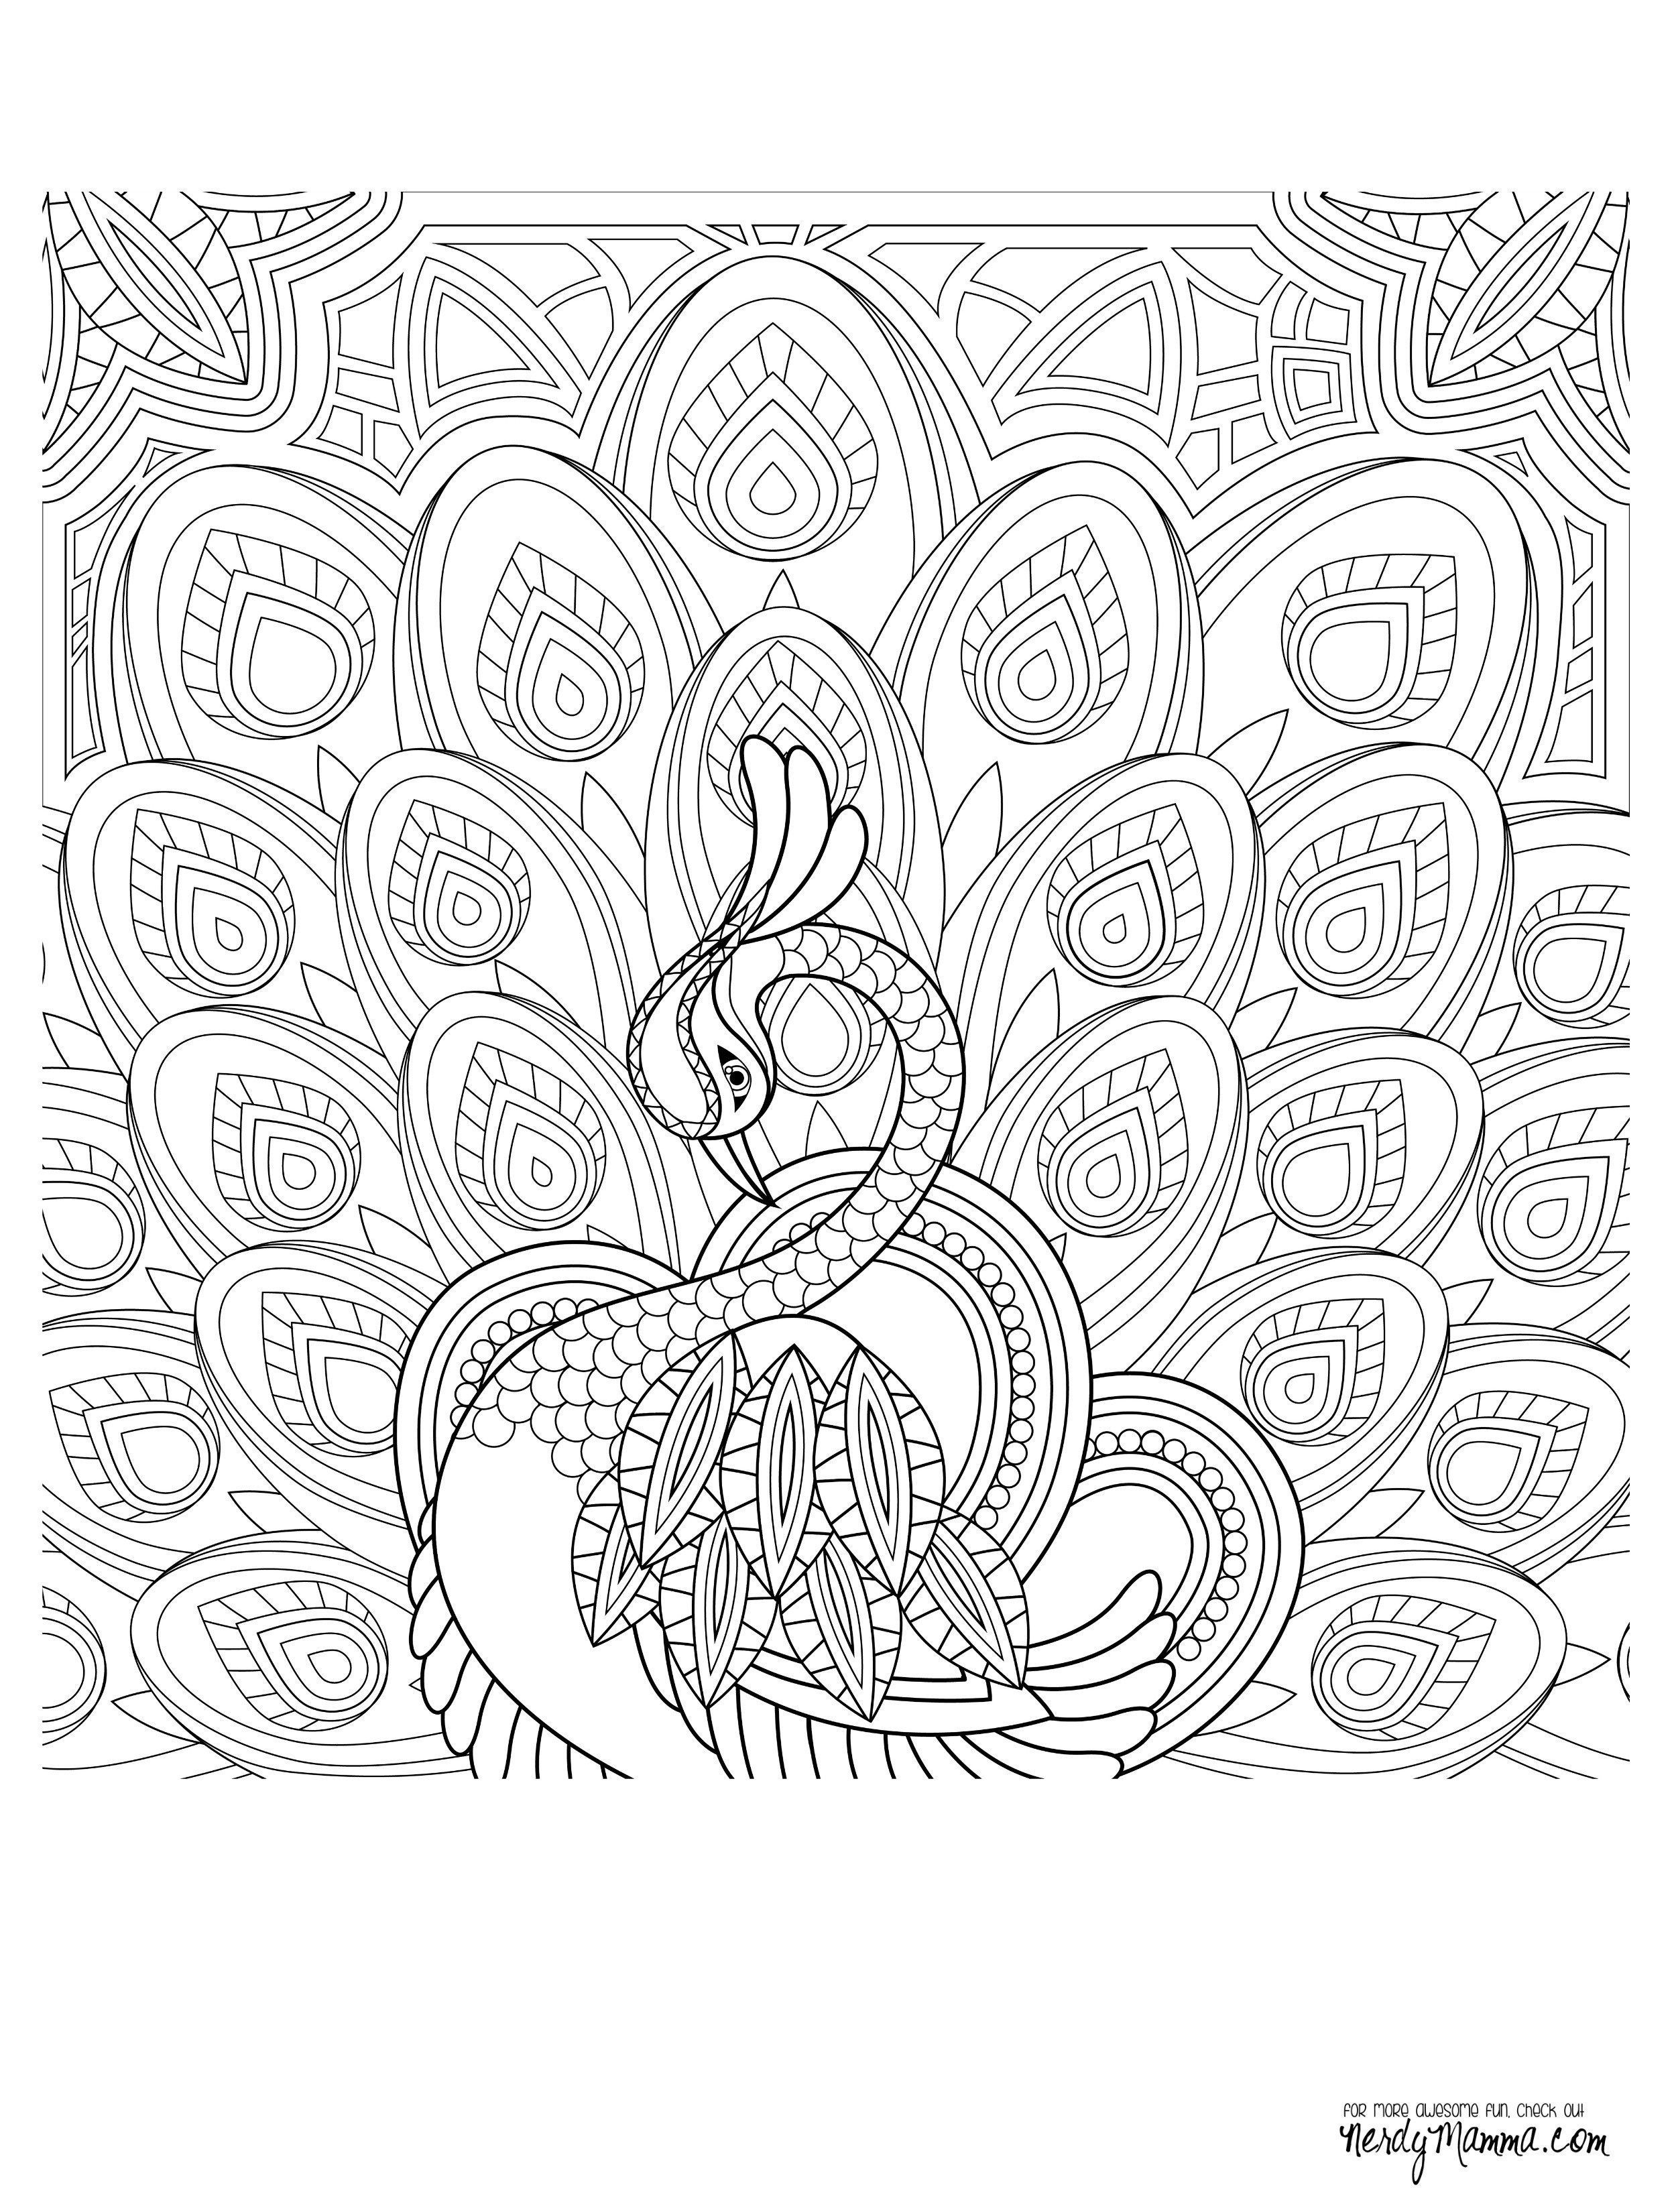 23 Recommended Flowers with Vase Included 2024 free download flowers with vase included of adult coloring flowers awesome cool vases flower vase coloring page in adult coloring flowers awesome cool vases flower vase coloring page pages flowers in a to